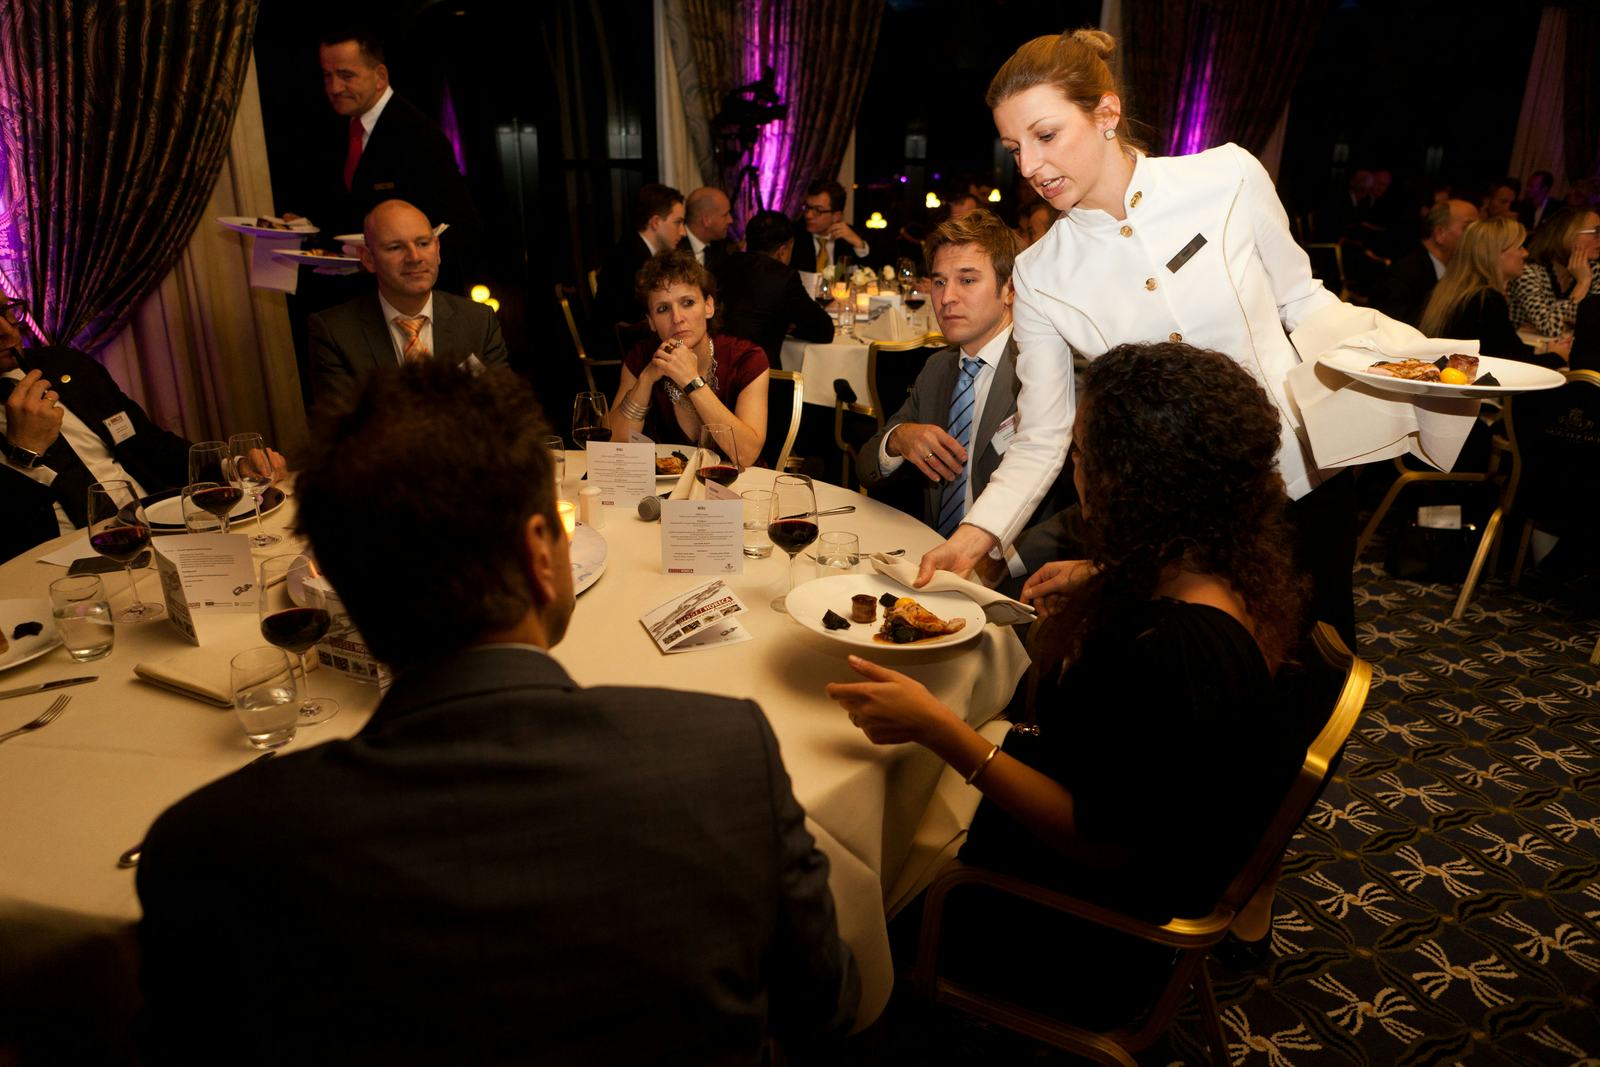 Video: Foodservice Awards 2014 in aantocht